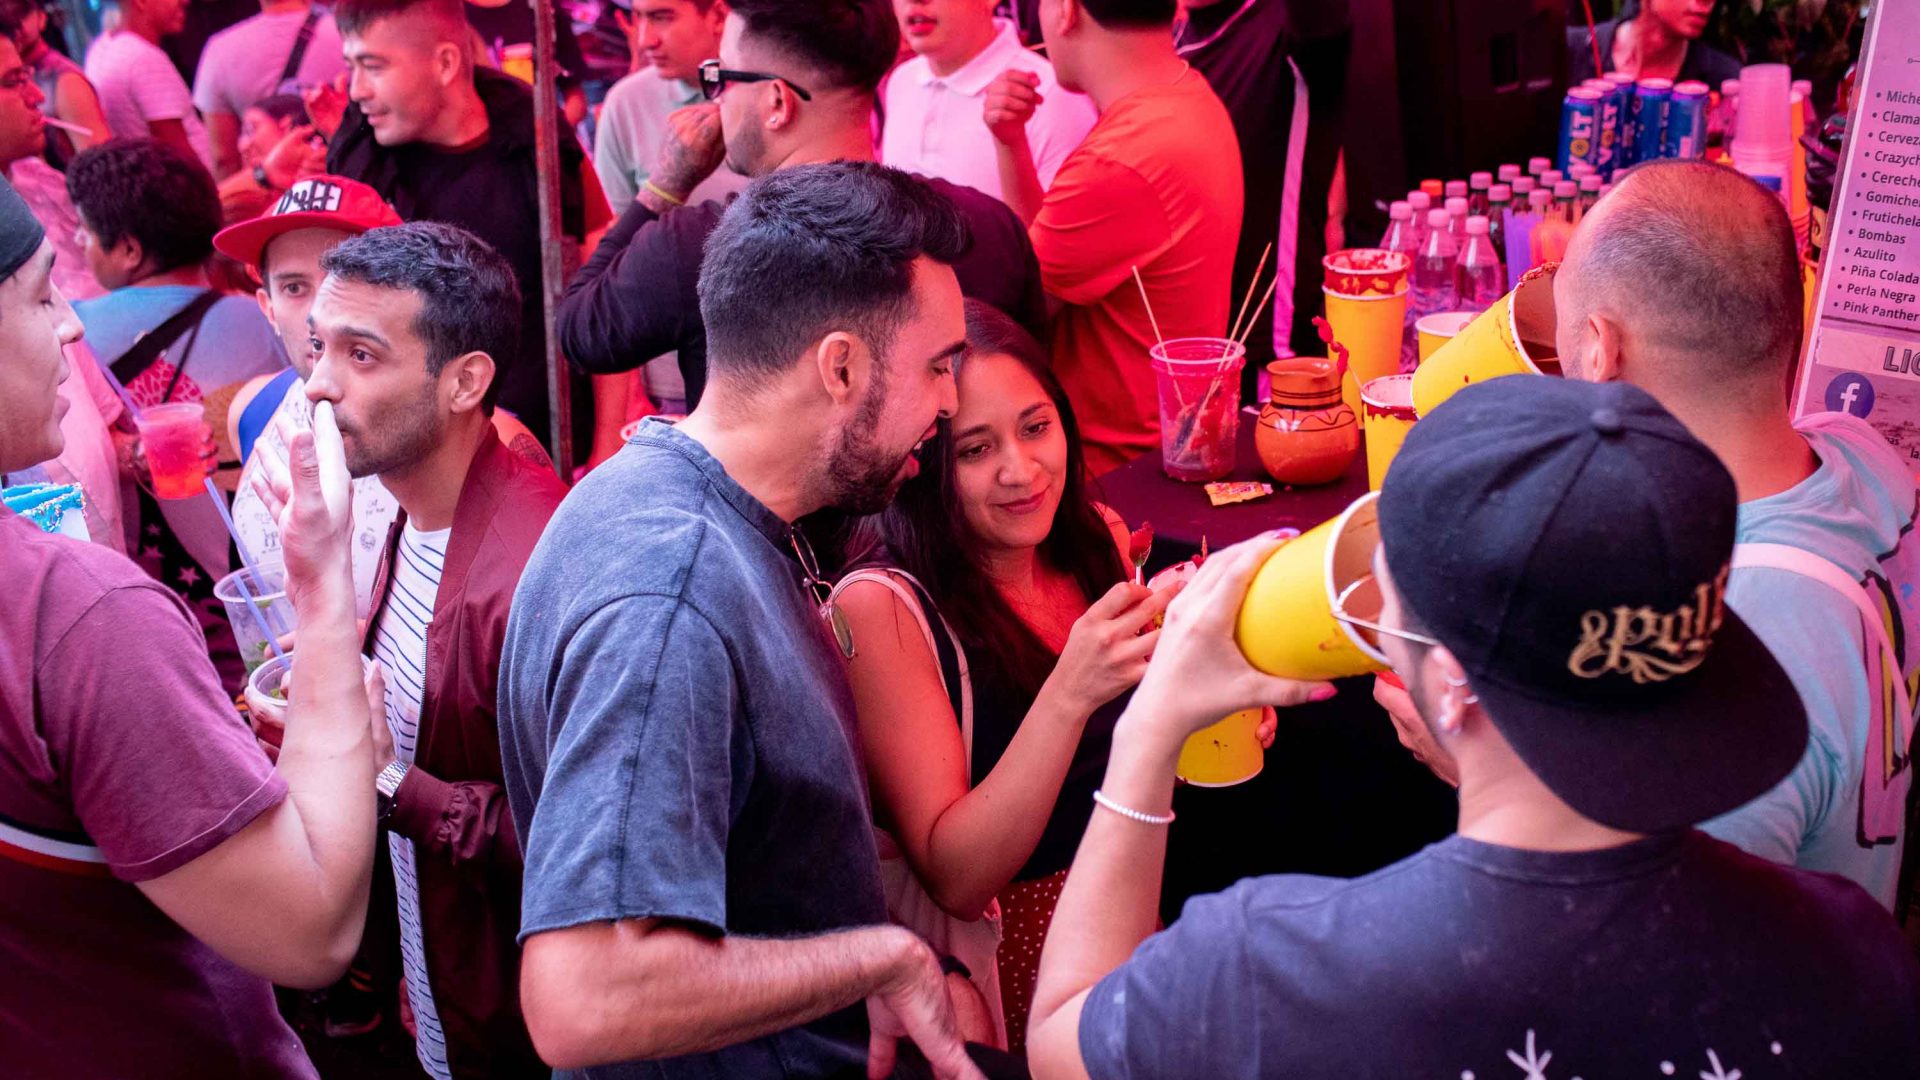 A group of people stand together drinking micheladas.